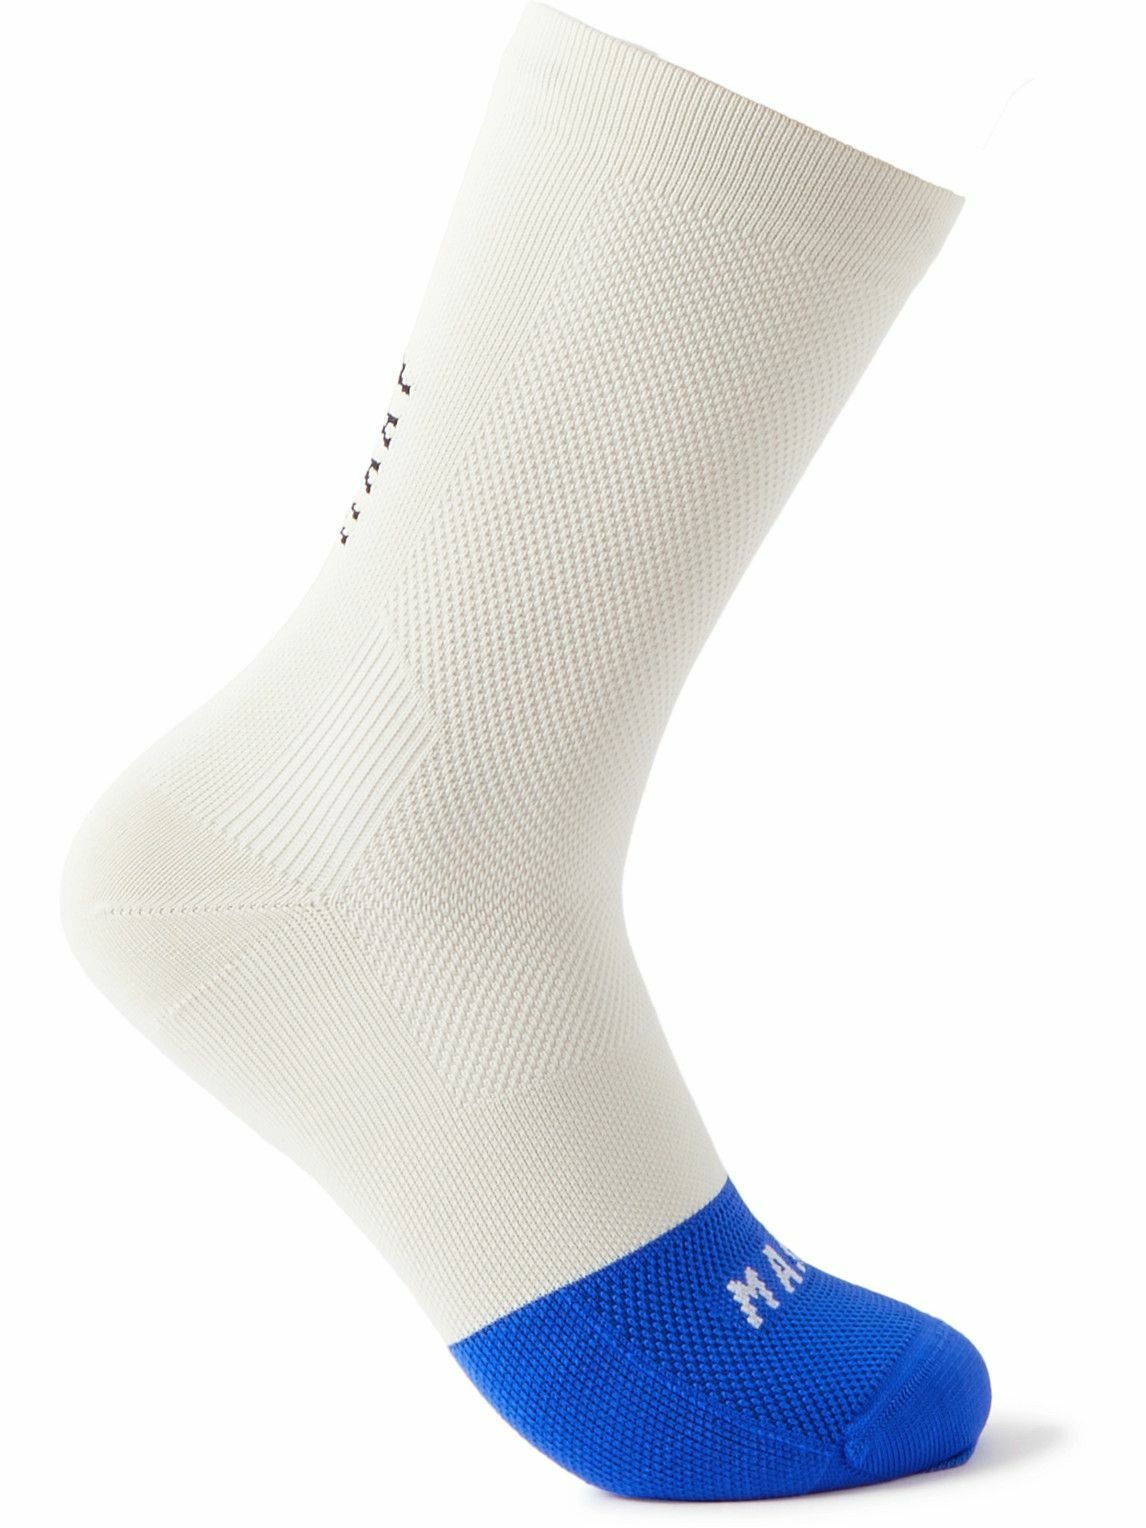 MAAP - Division Colour-Block Stretch-Knit Cycling Socks - Gray MAAP